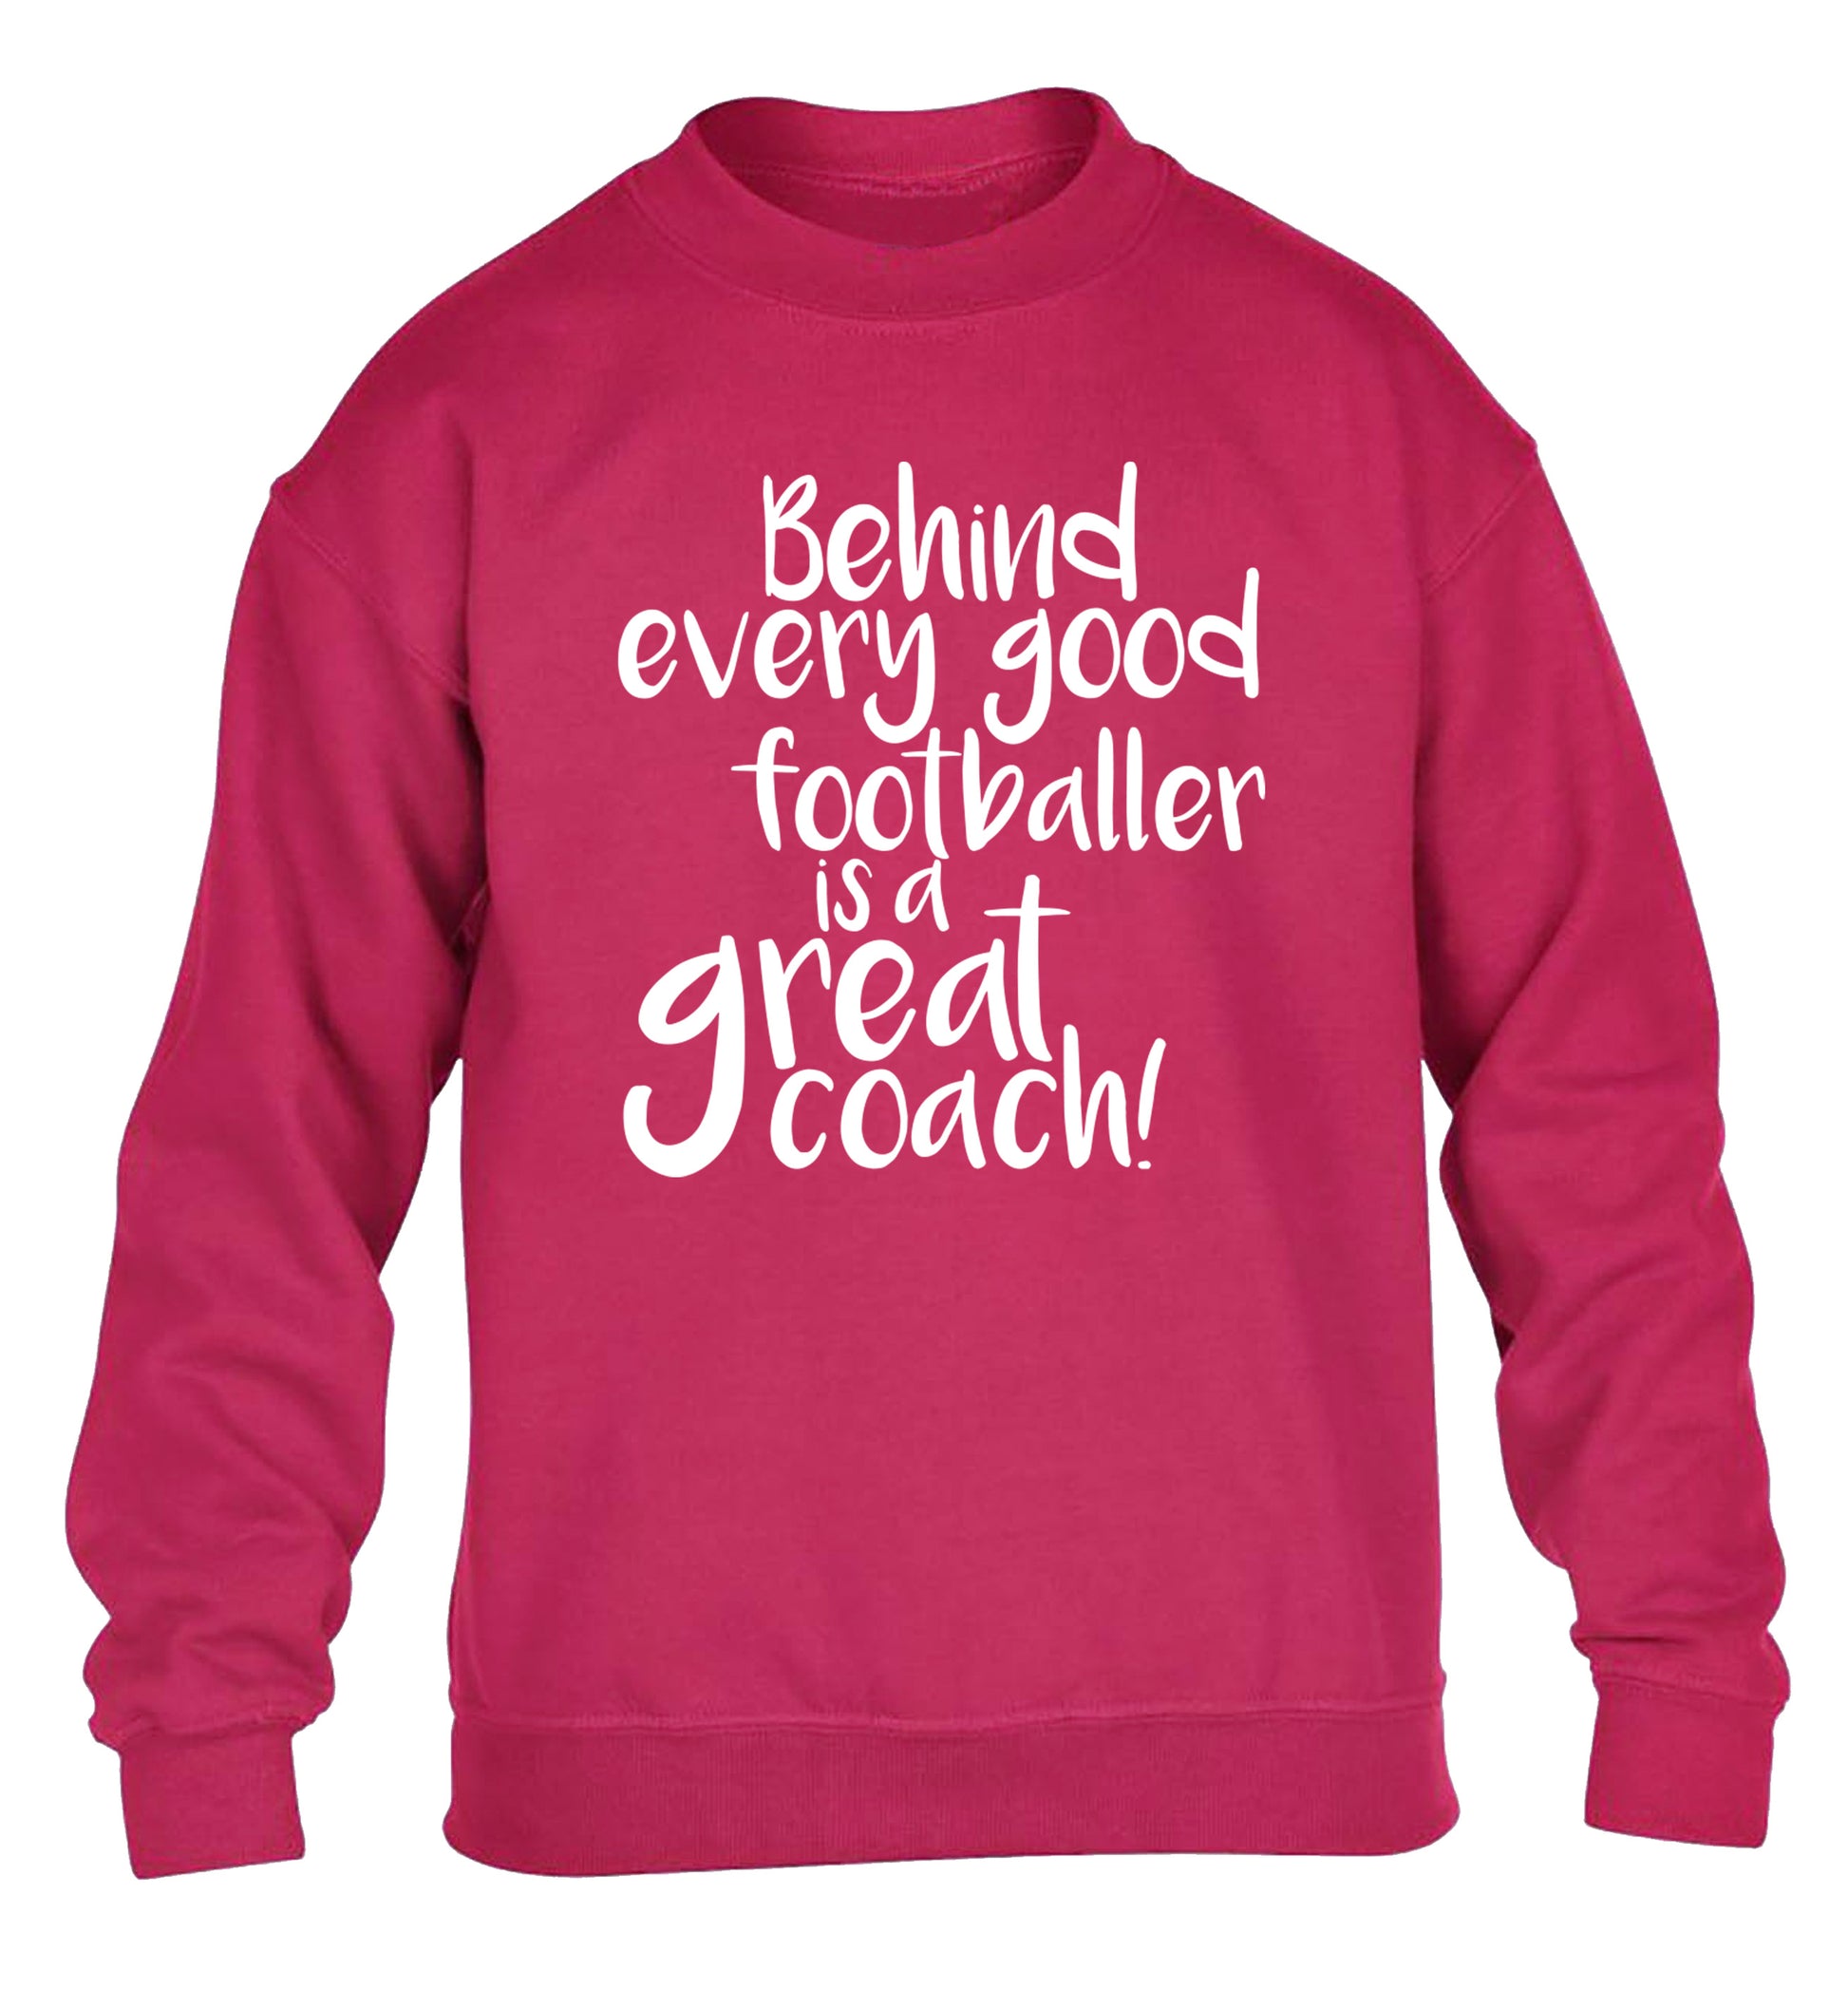 Behind every good footballer is a great coach! children's pink sweater 12-14 Years